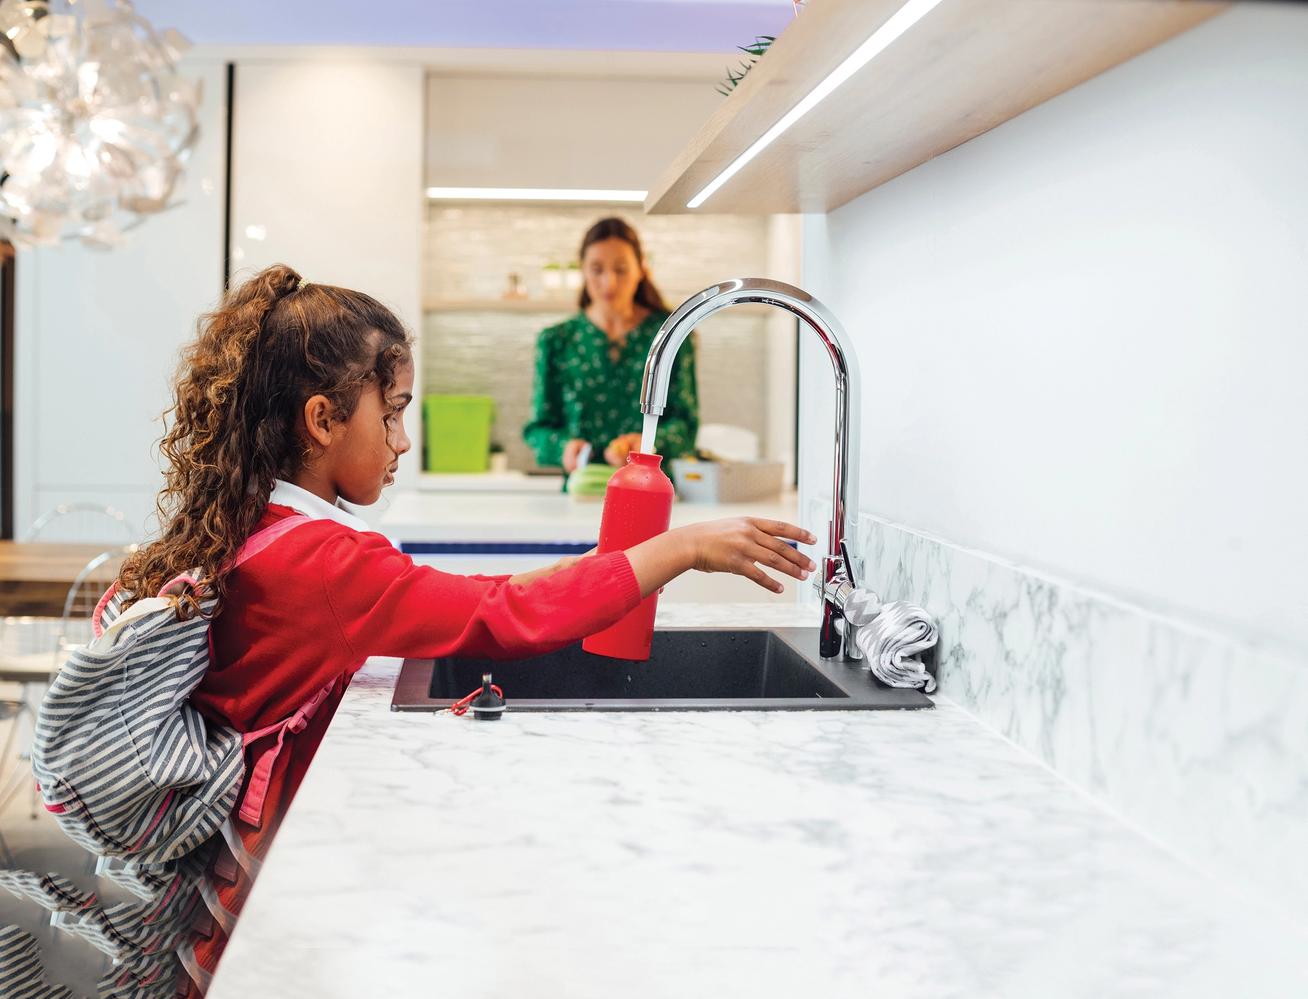 A young girl wearing her school uniform filling up her water bottle at the kitchen sink